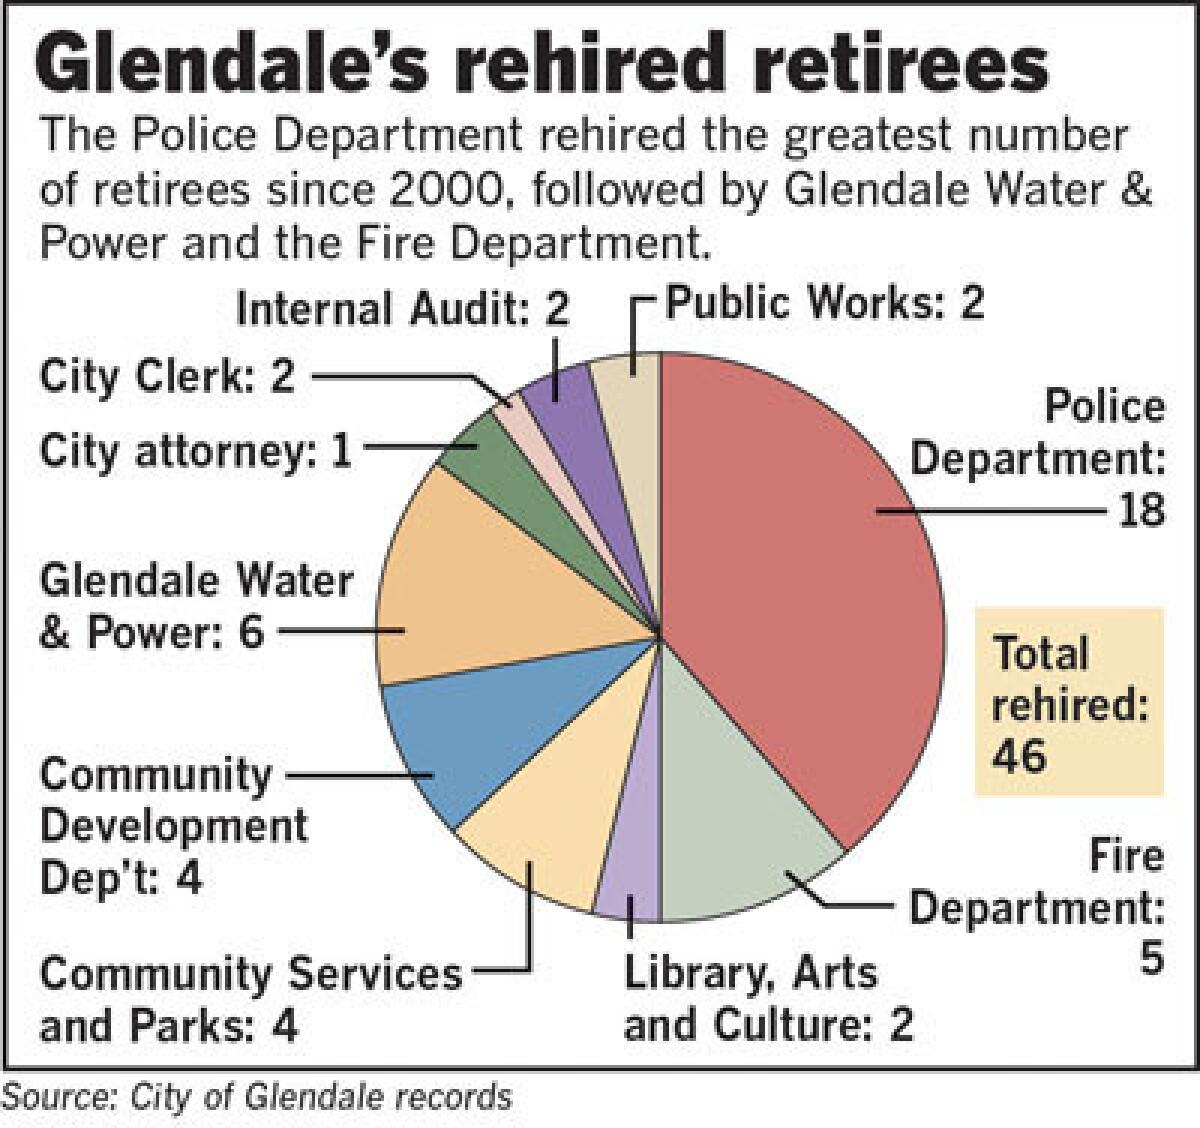 An analysis of of records from Glendale and California Public Employees¿ Retirement System, or CalPERS, shows that 46 retired city employees returned to work at City Hall since 2000.